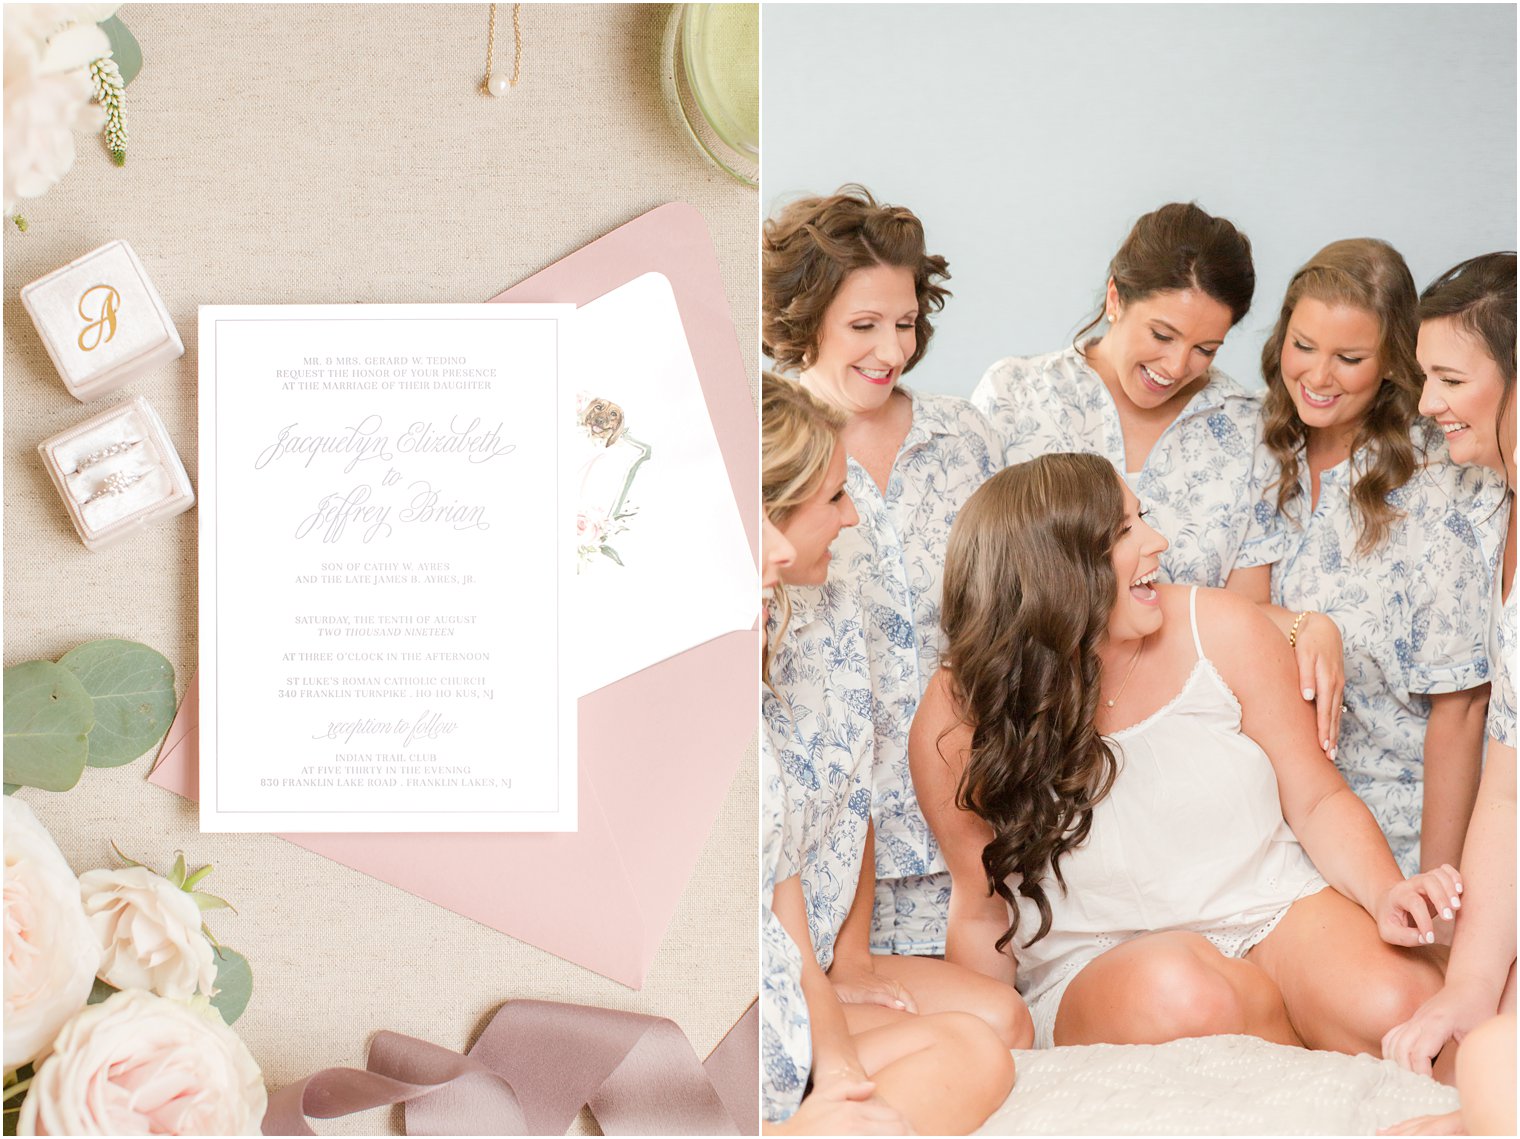 Wedding invitations by Narrative Designs Co. and bride and bridesmaids wearing floral pajamas